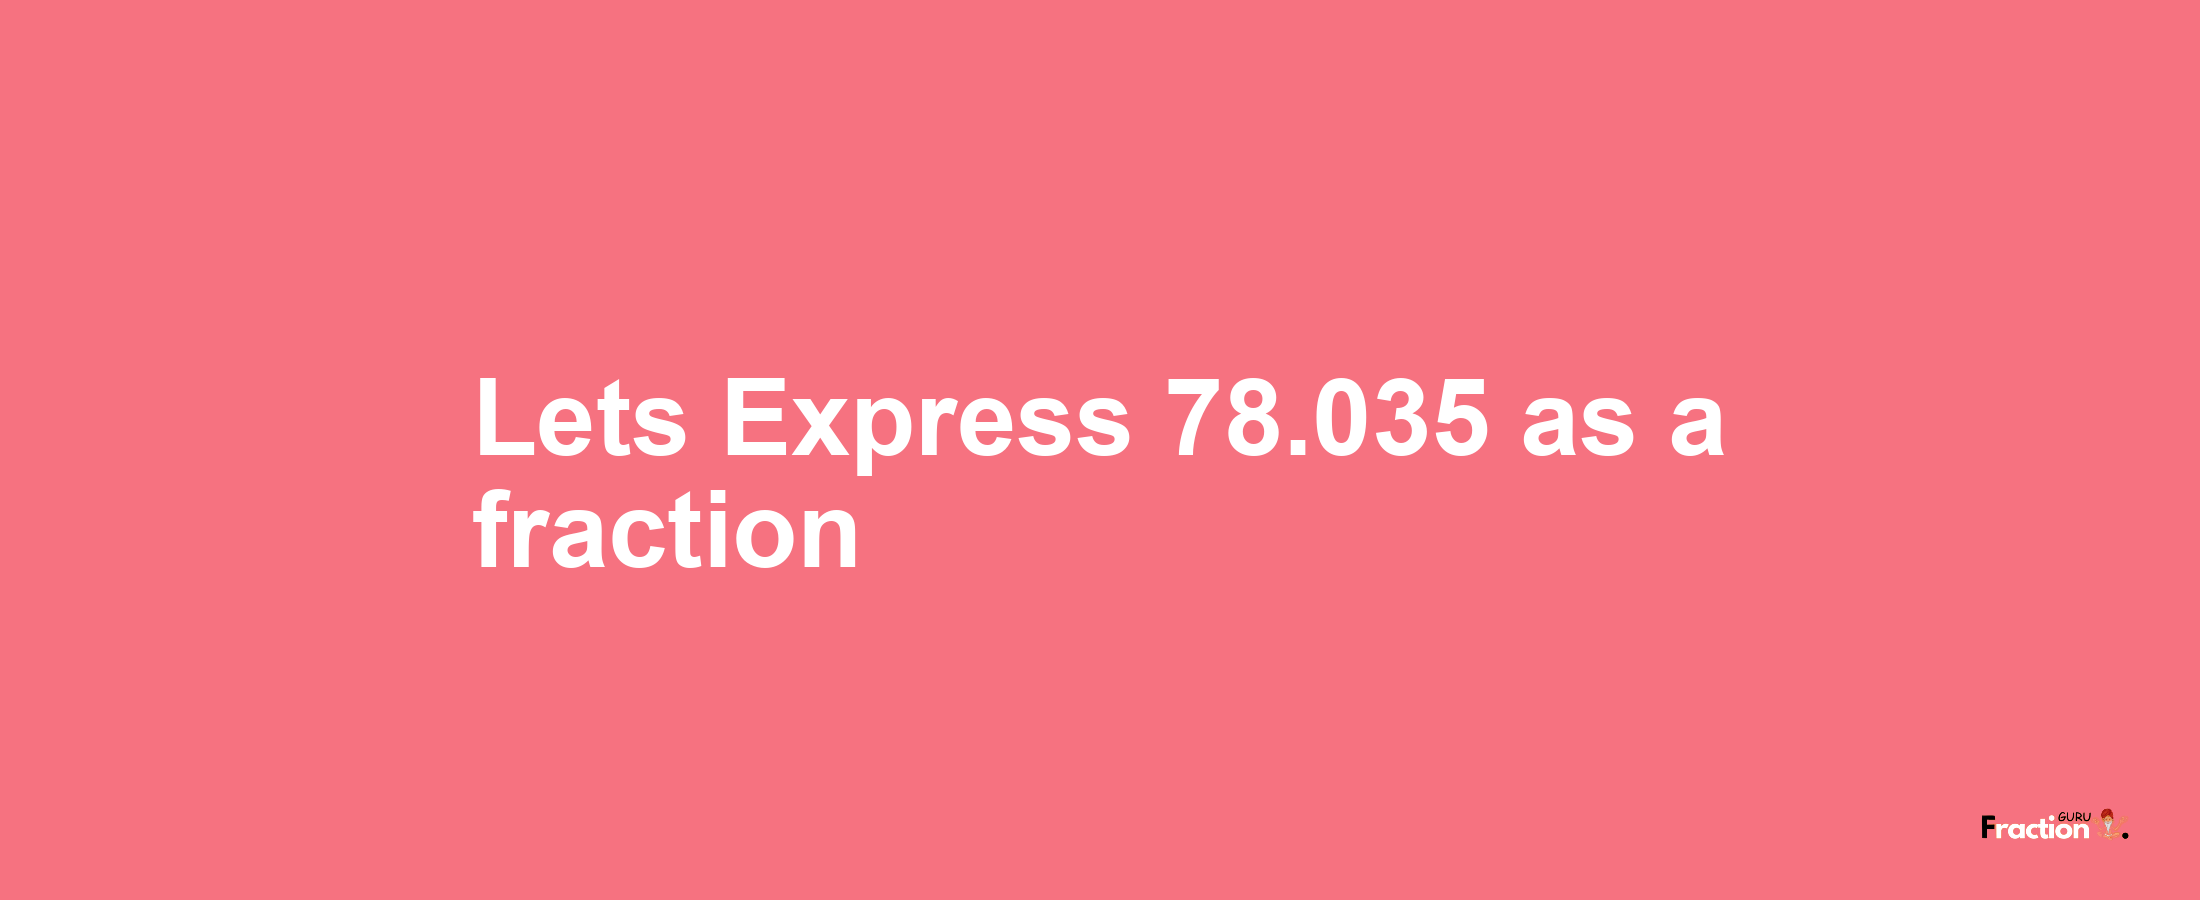 Lets Express 78.035 as afraction